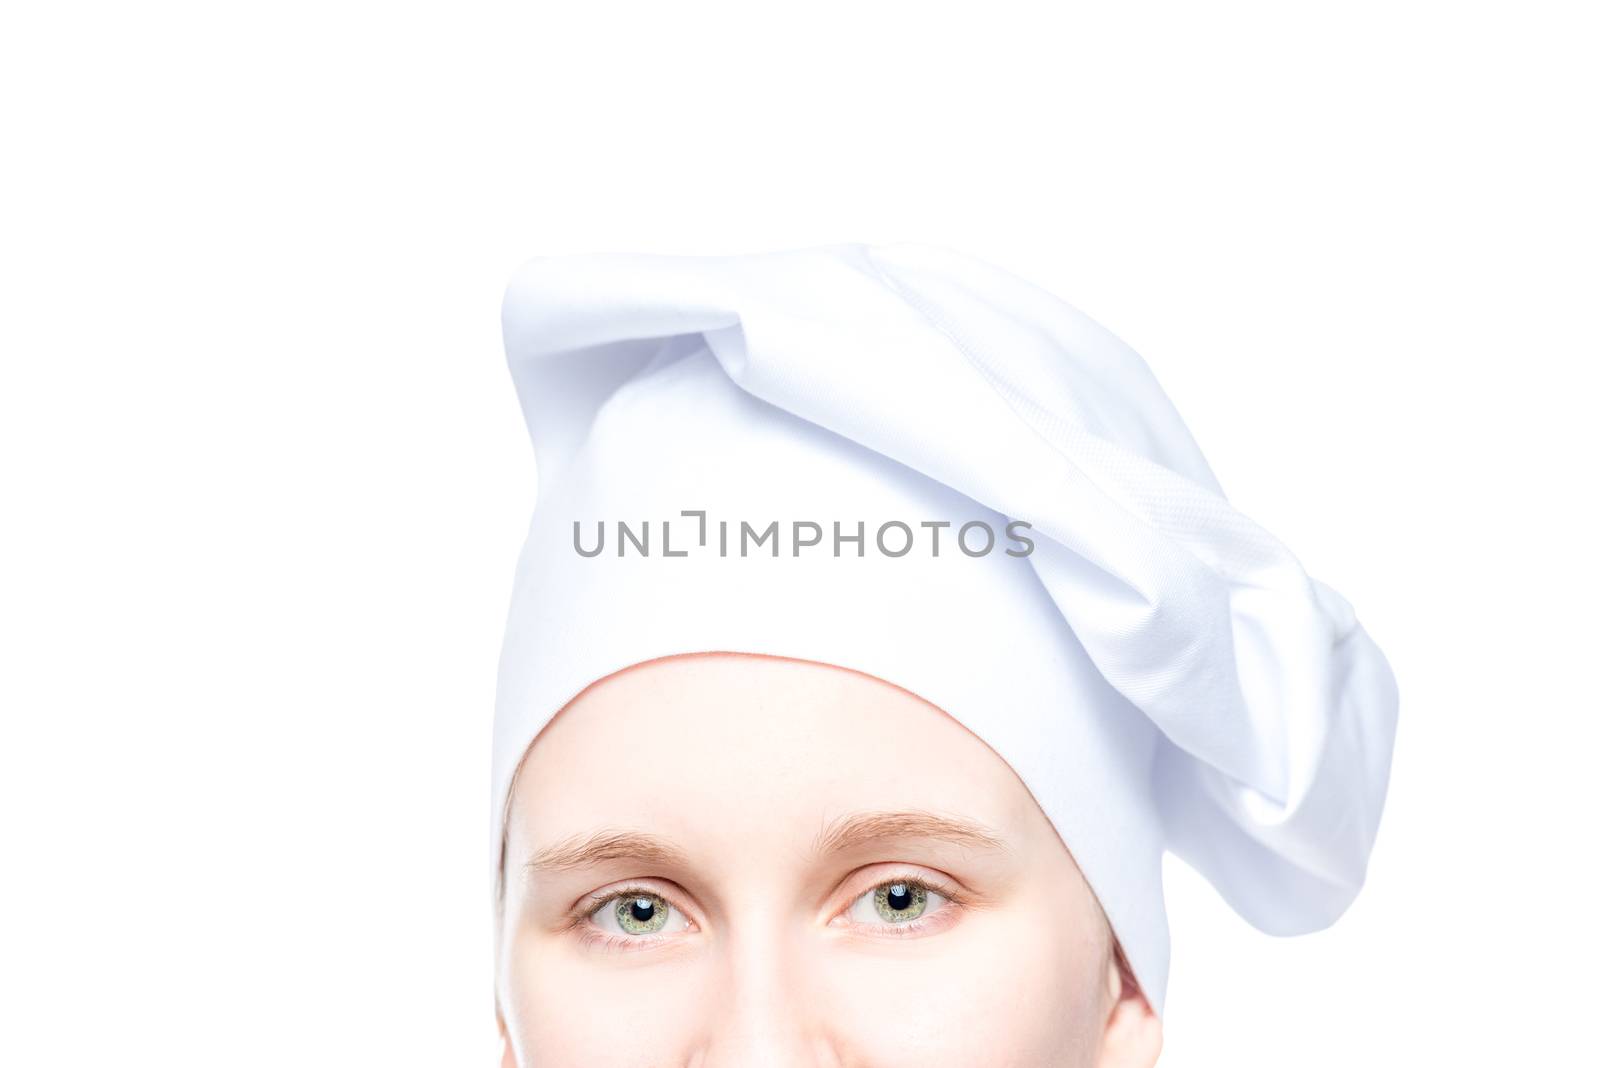 female chef's eyes with hat close up on white background